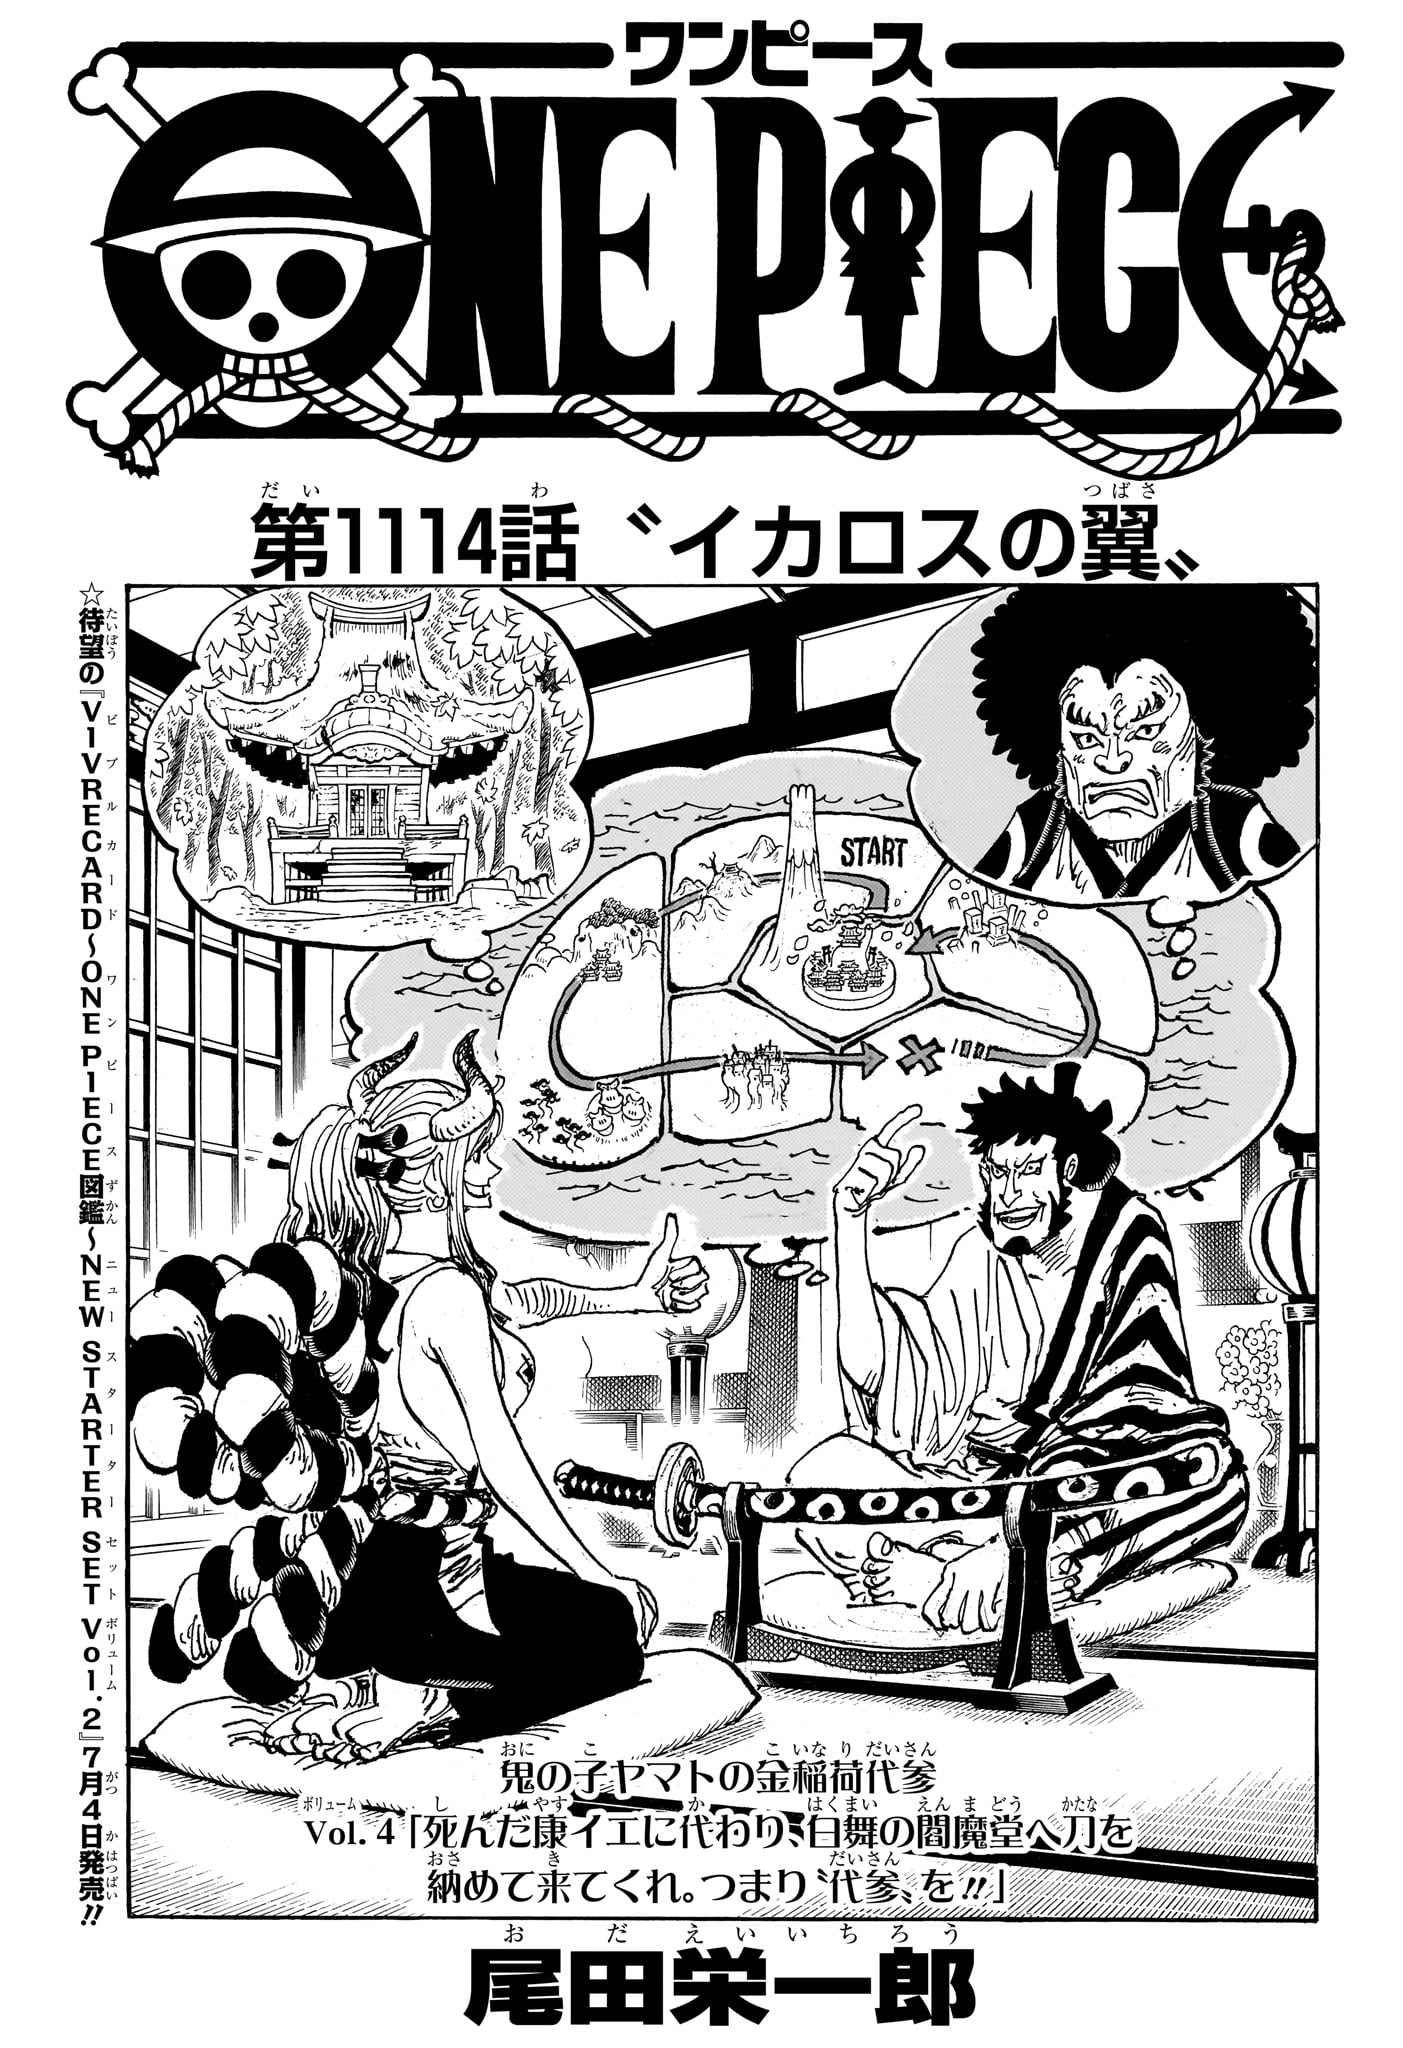 One Piece - Chapter 1114 - Page 1